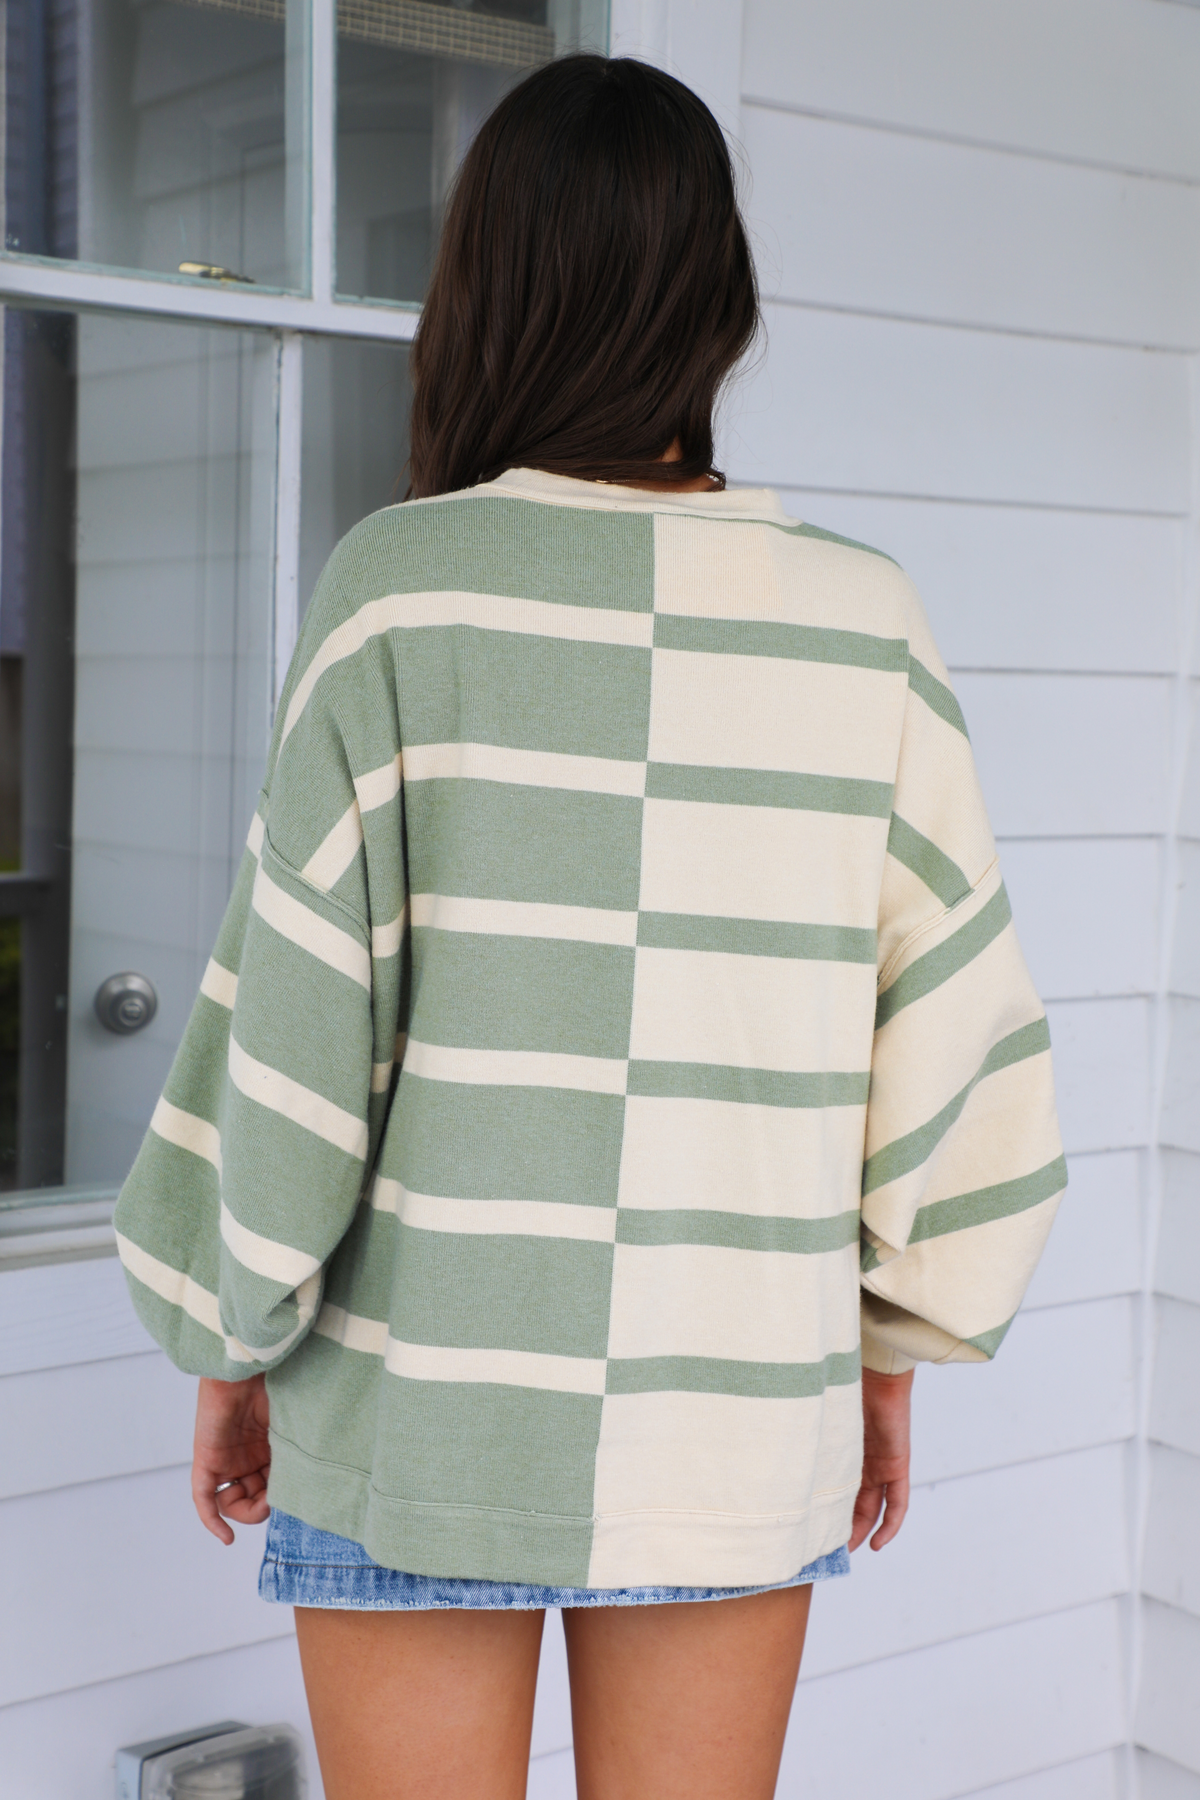 The Little Things Sweater: Sage/Cream